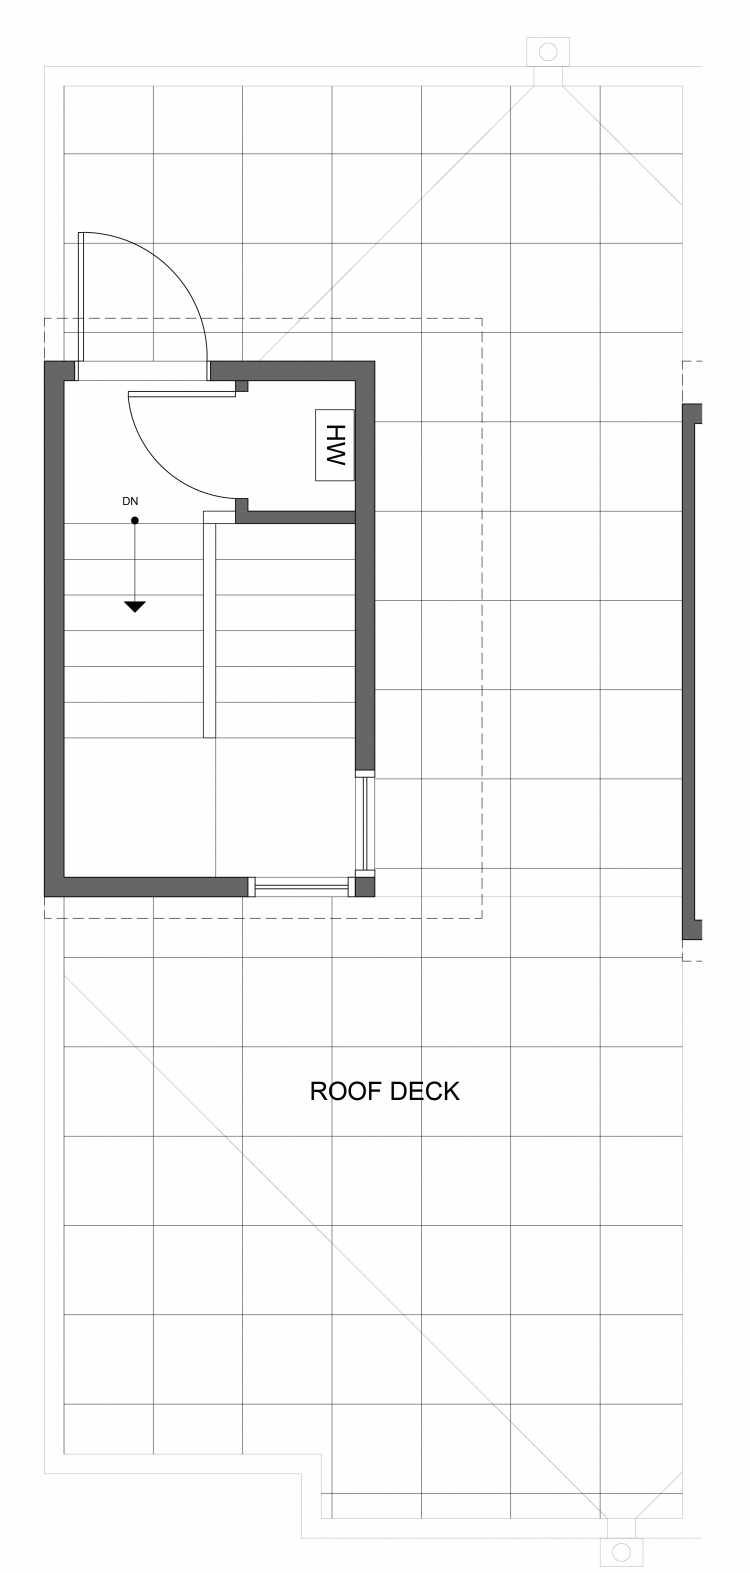 Roof Deck Floor Plan of 1030A NE 70th St, One of the Sopris on 70th Townhomes in Roosevelt